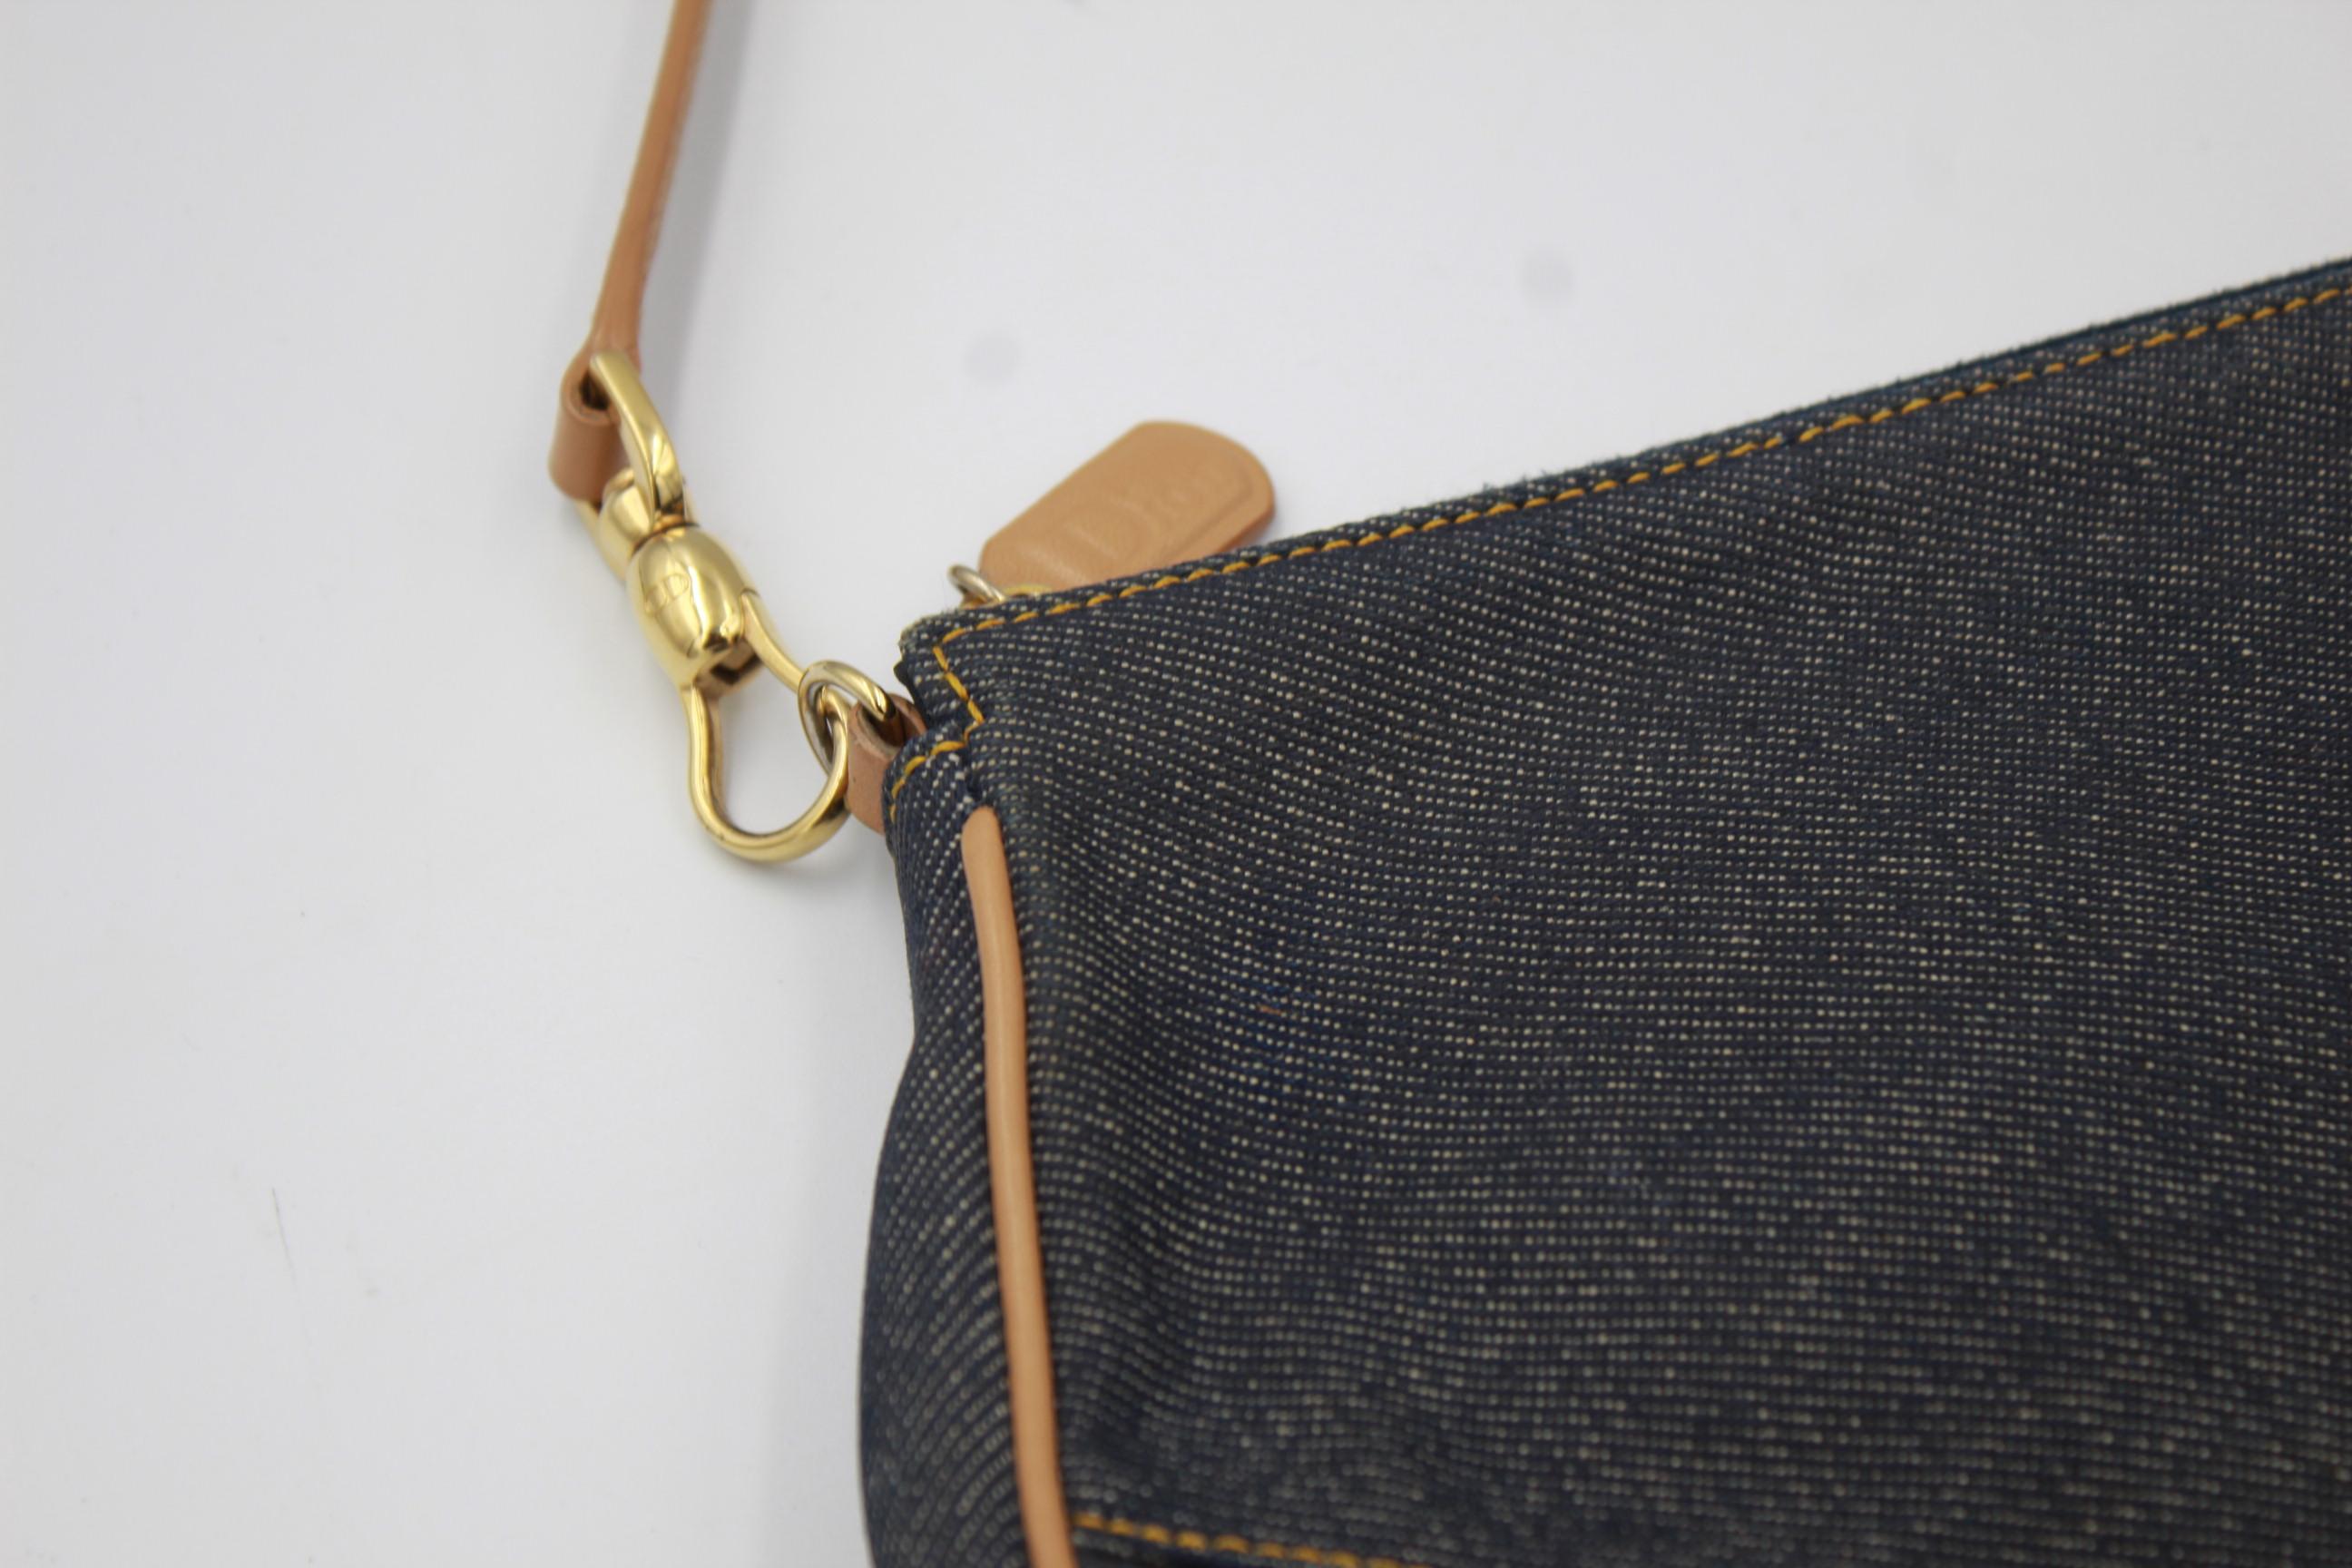 Iconic and must have of the season the iconic saddle bag 
Made in leather and denim
Small size 8*6 inches 
Nearly 20x16 cm
